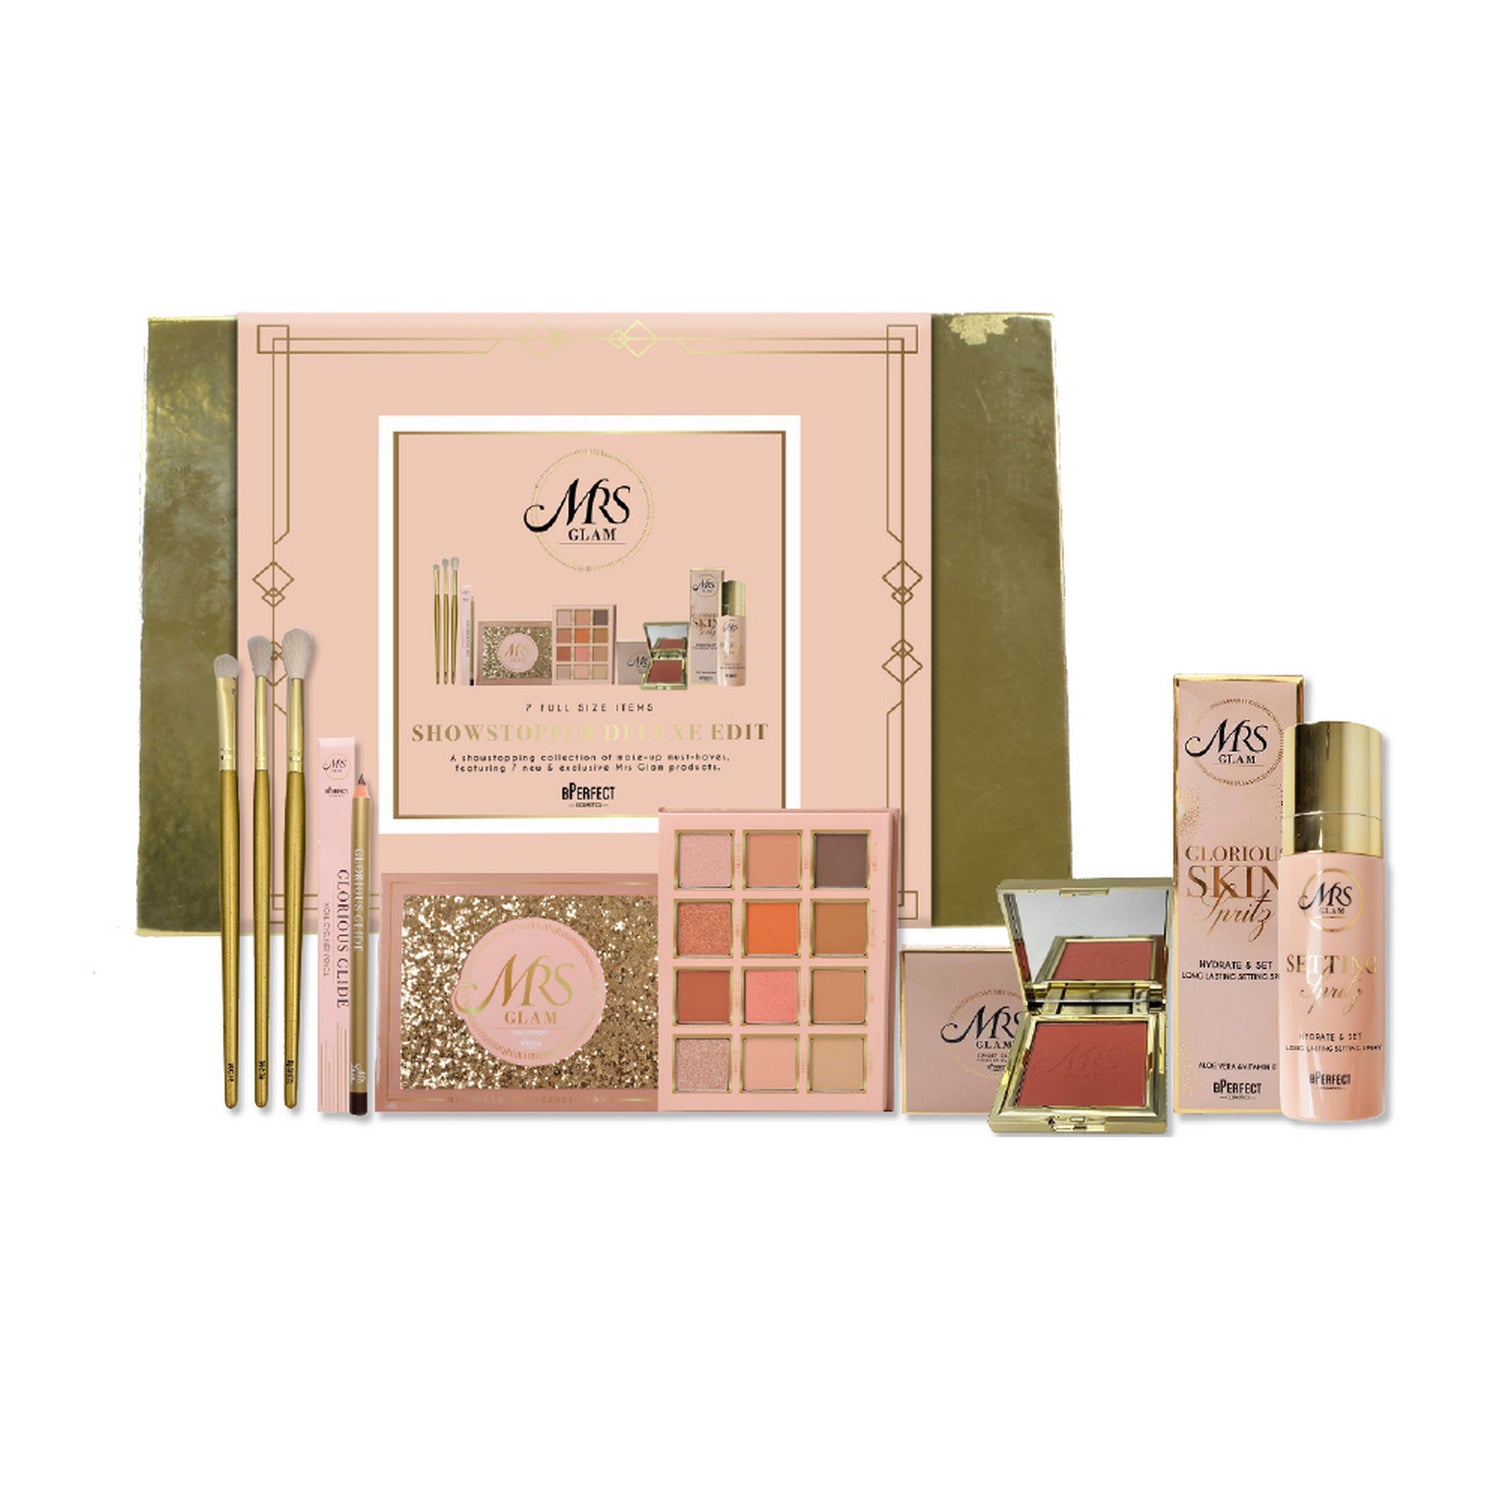 Mrs Glam The Showstopper Cosmetic Edit Set